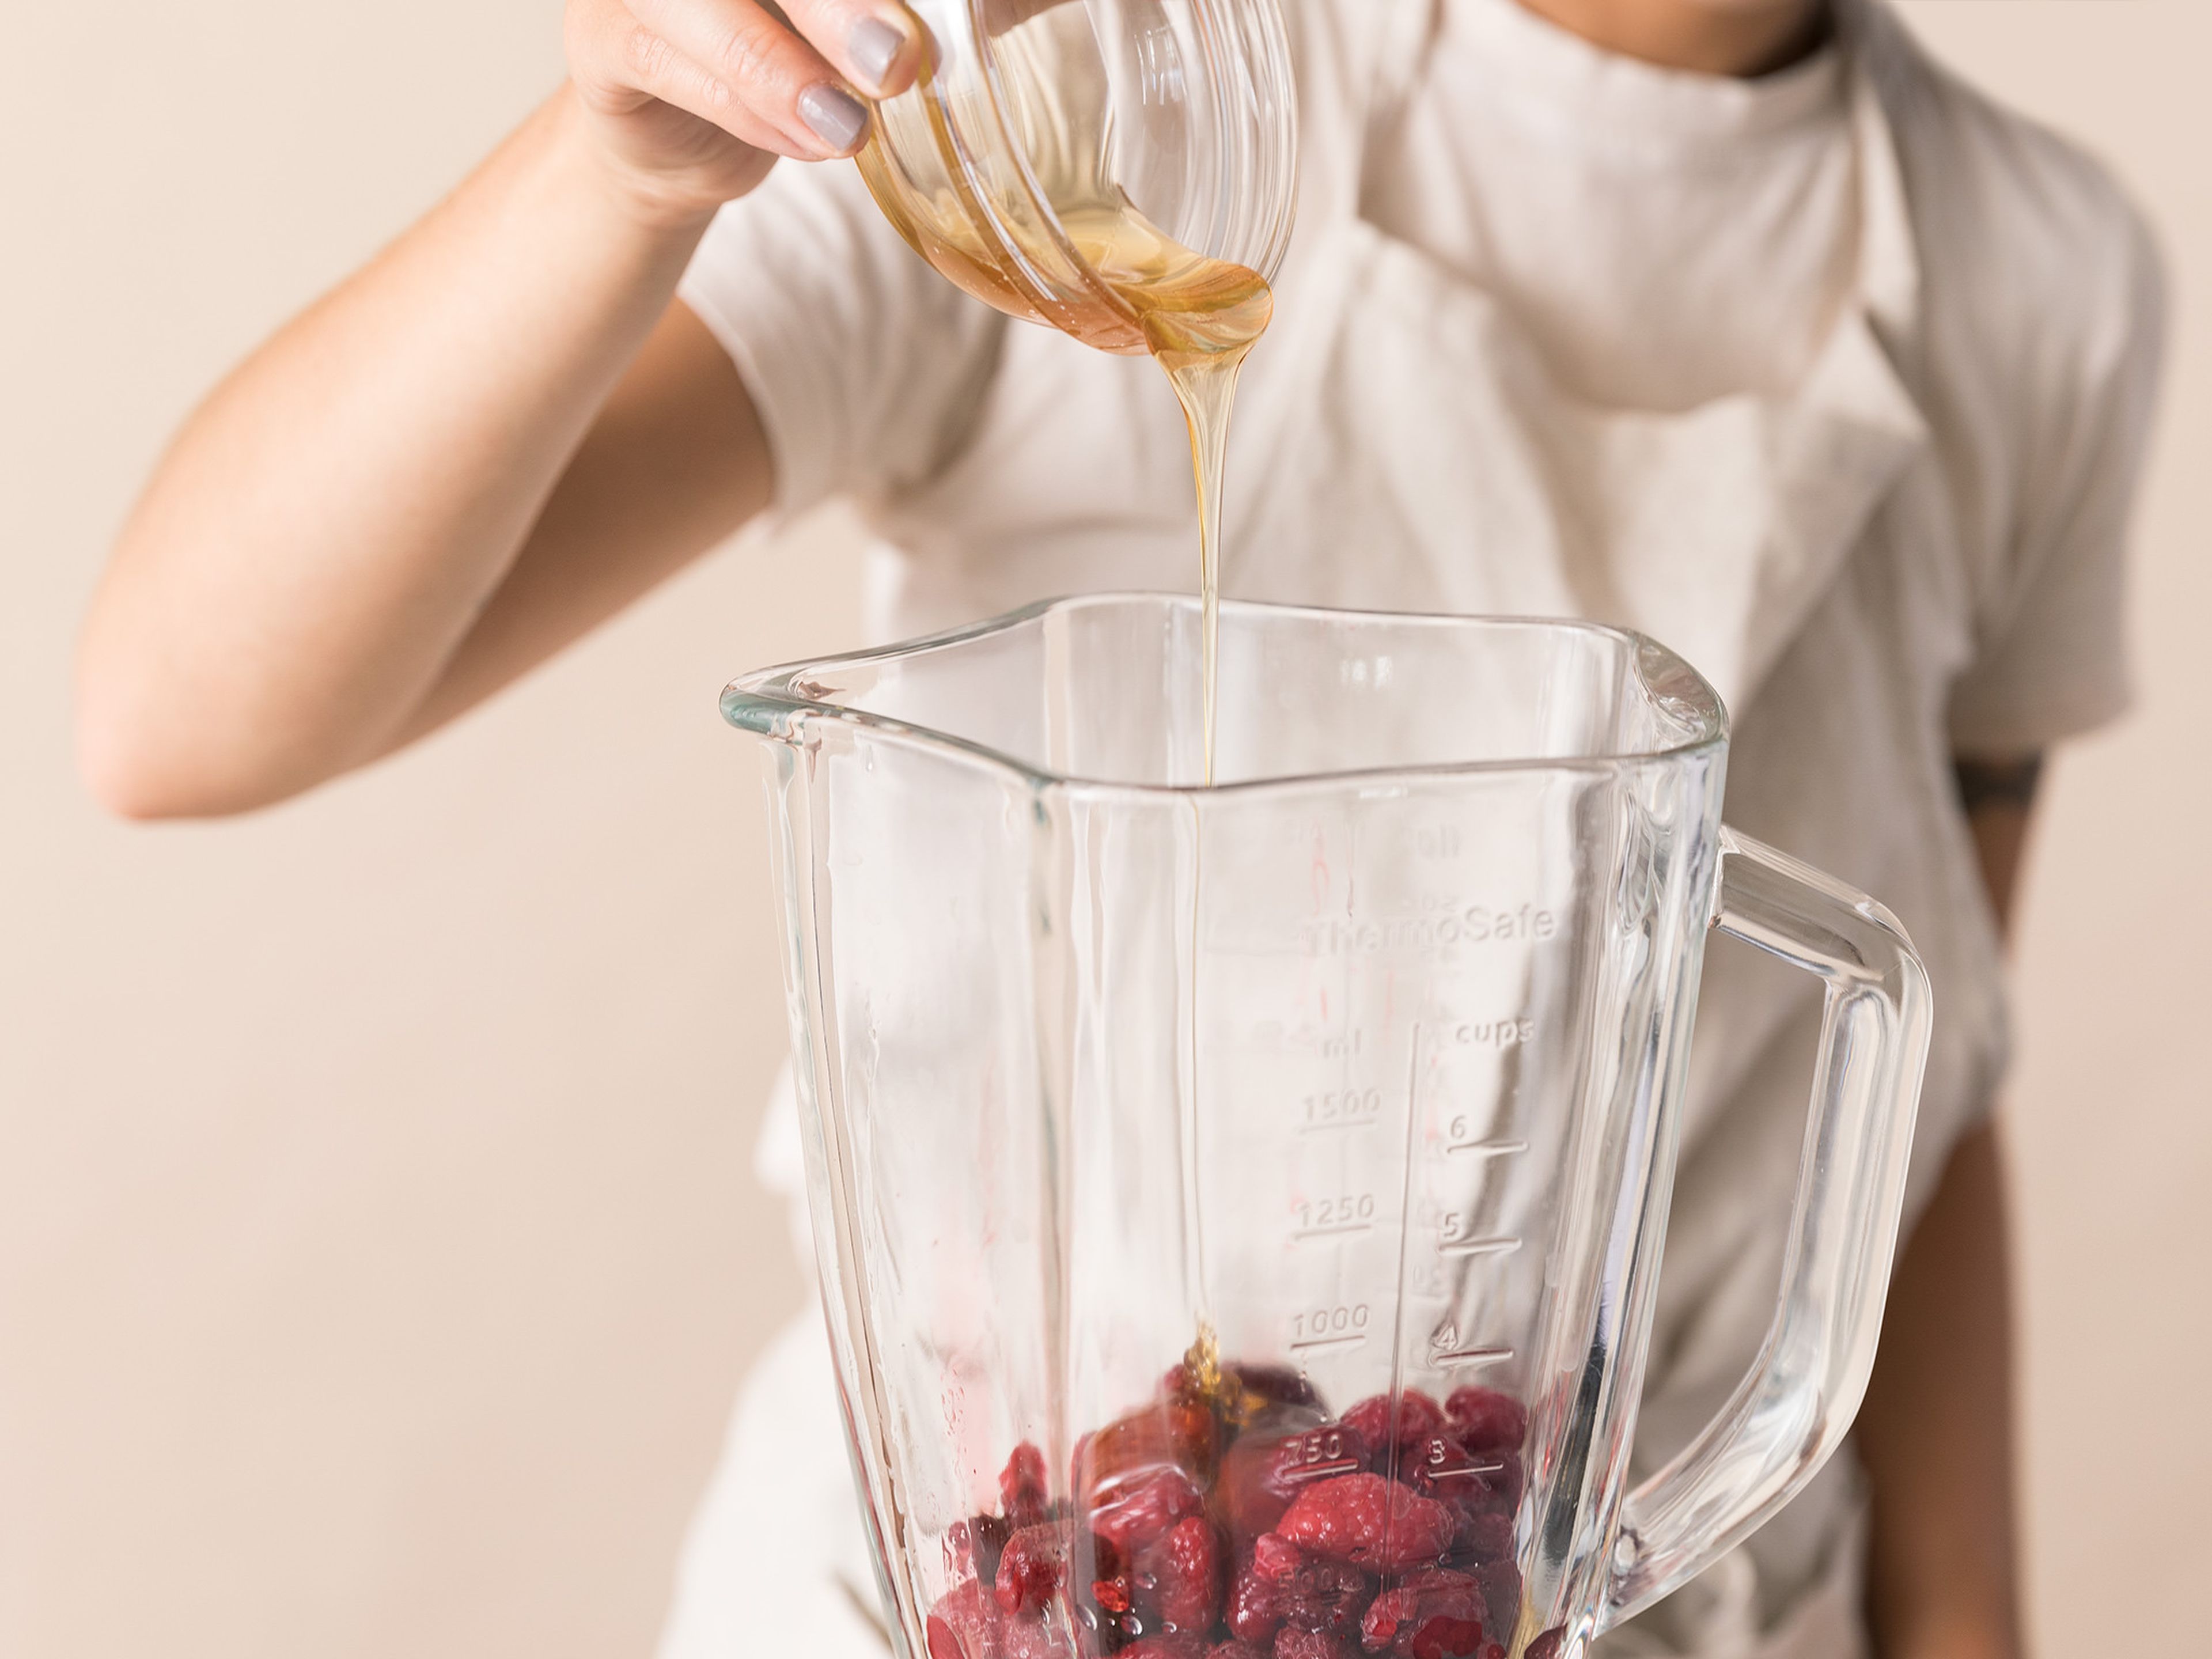 Add mostly thawed raspberries, lemon juice, and honey to a blender. Blend to combine. Add to a loaf pan and freeze for approx. 90 min. or until semi-solid. Scoop, top with lemon zest, and enjoy!